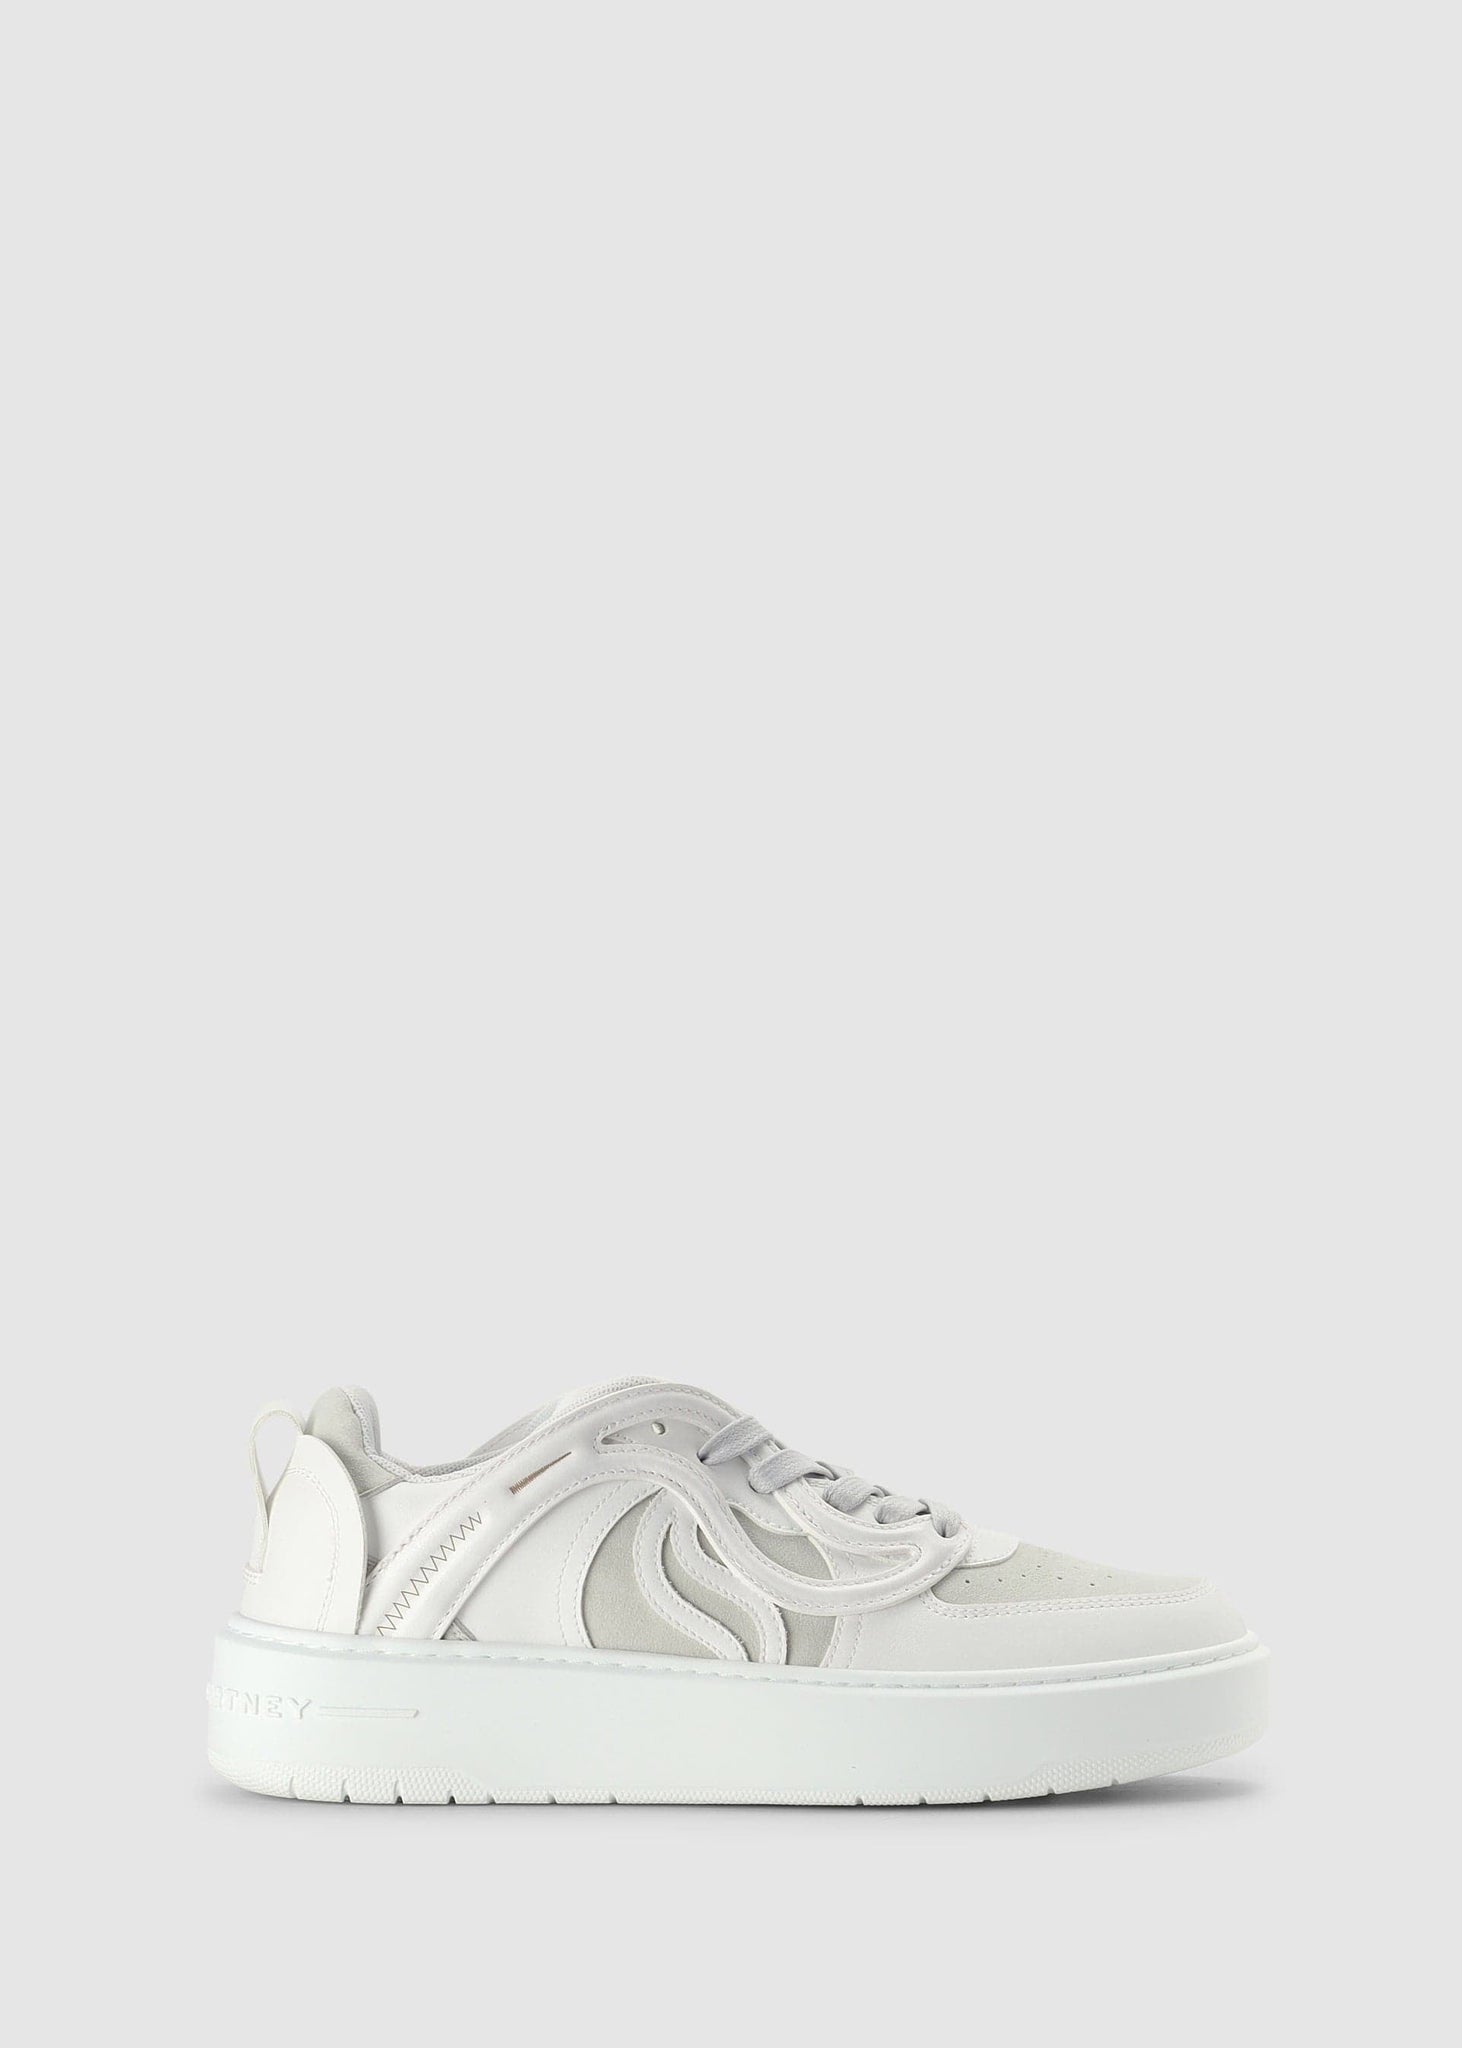 Image of Stella McCartney Women's S-Wave White Trainers